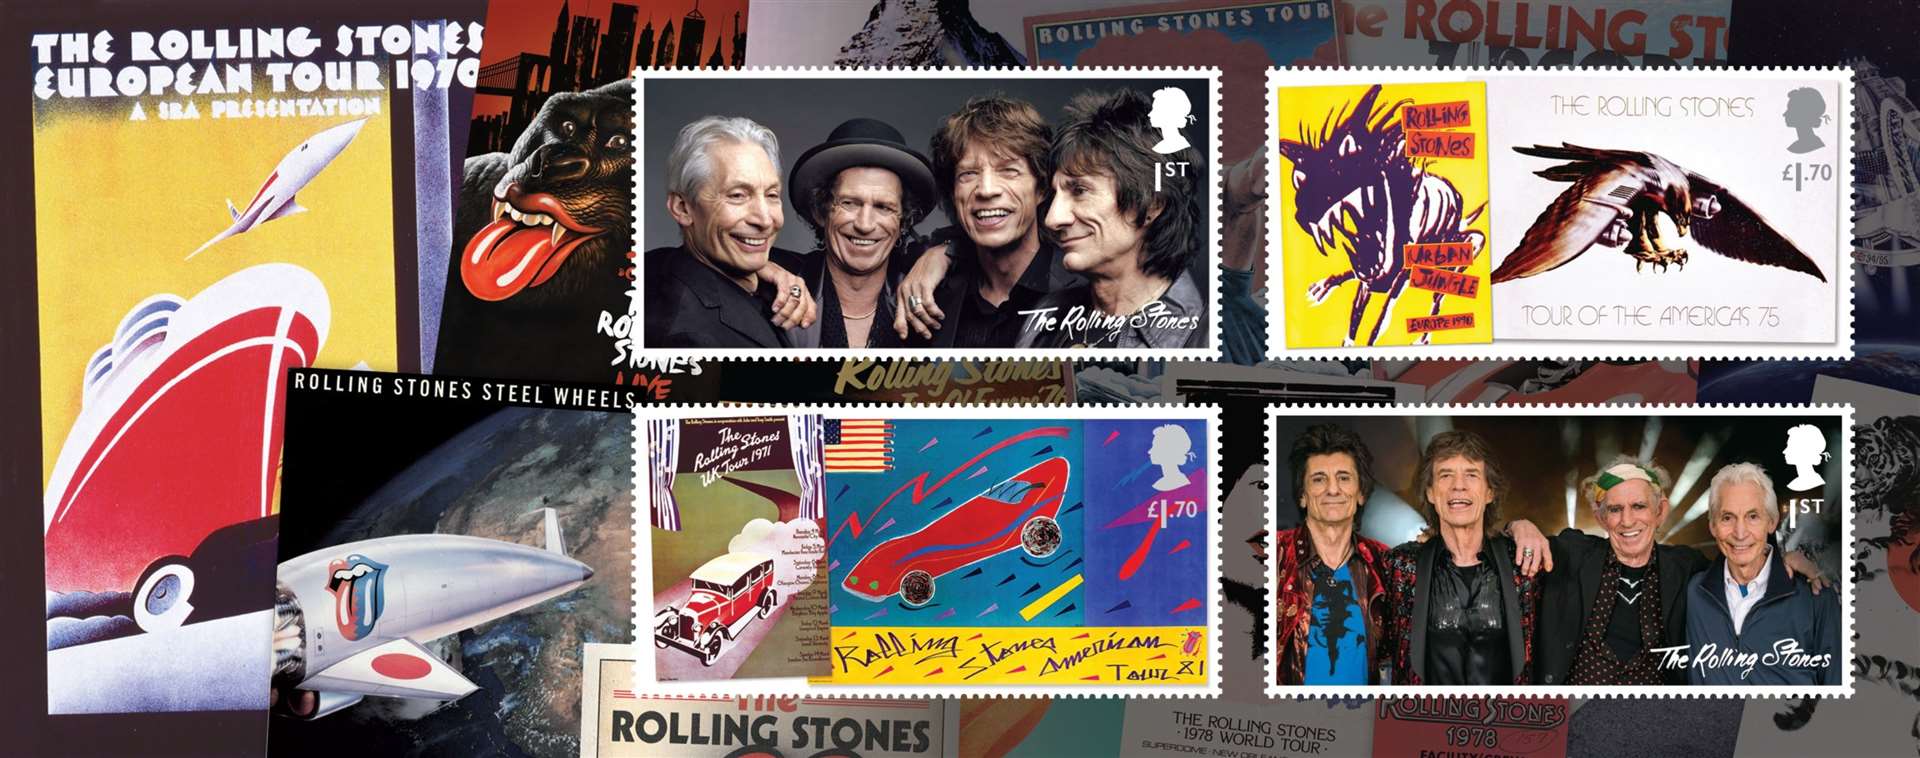 Two vintage tour posters are among the images chosen for a stamp